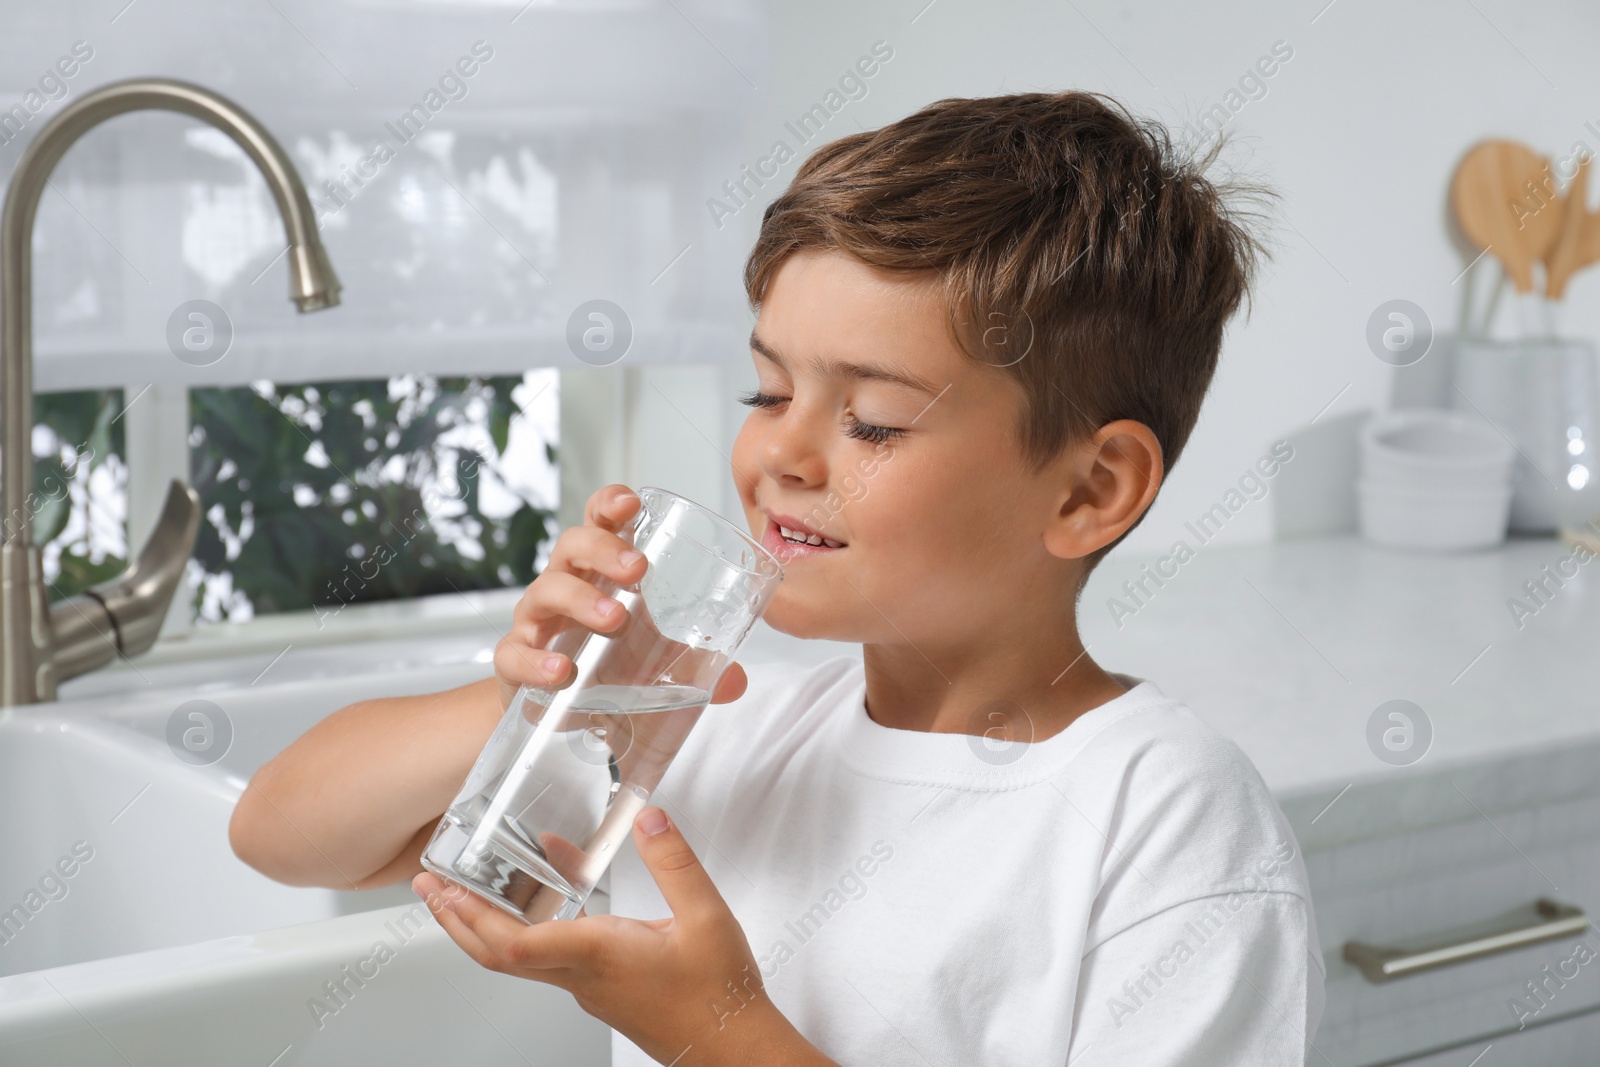 Photo of Boy drinking tap water from glass in kitchen